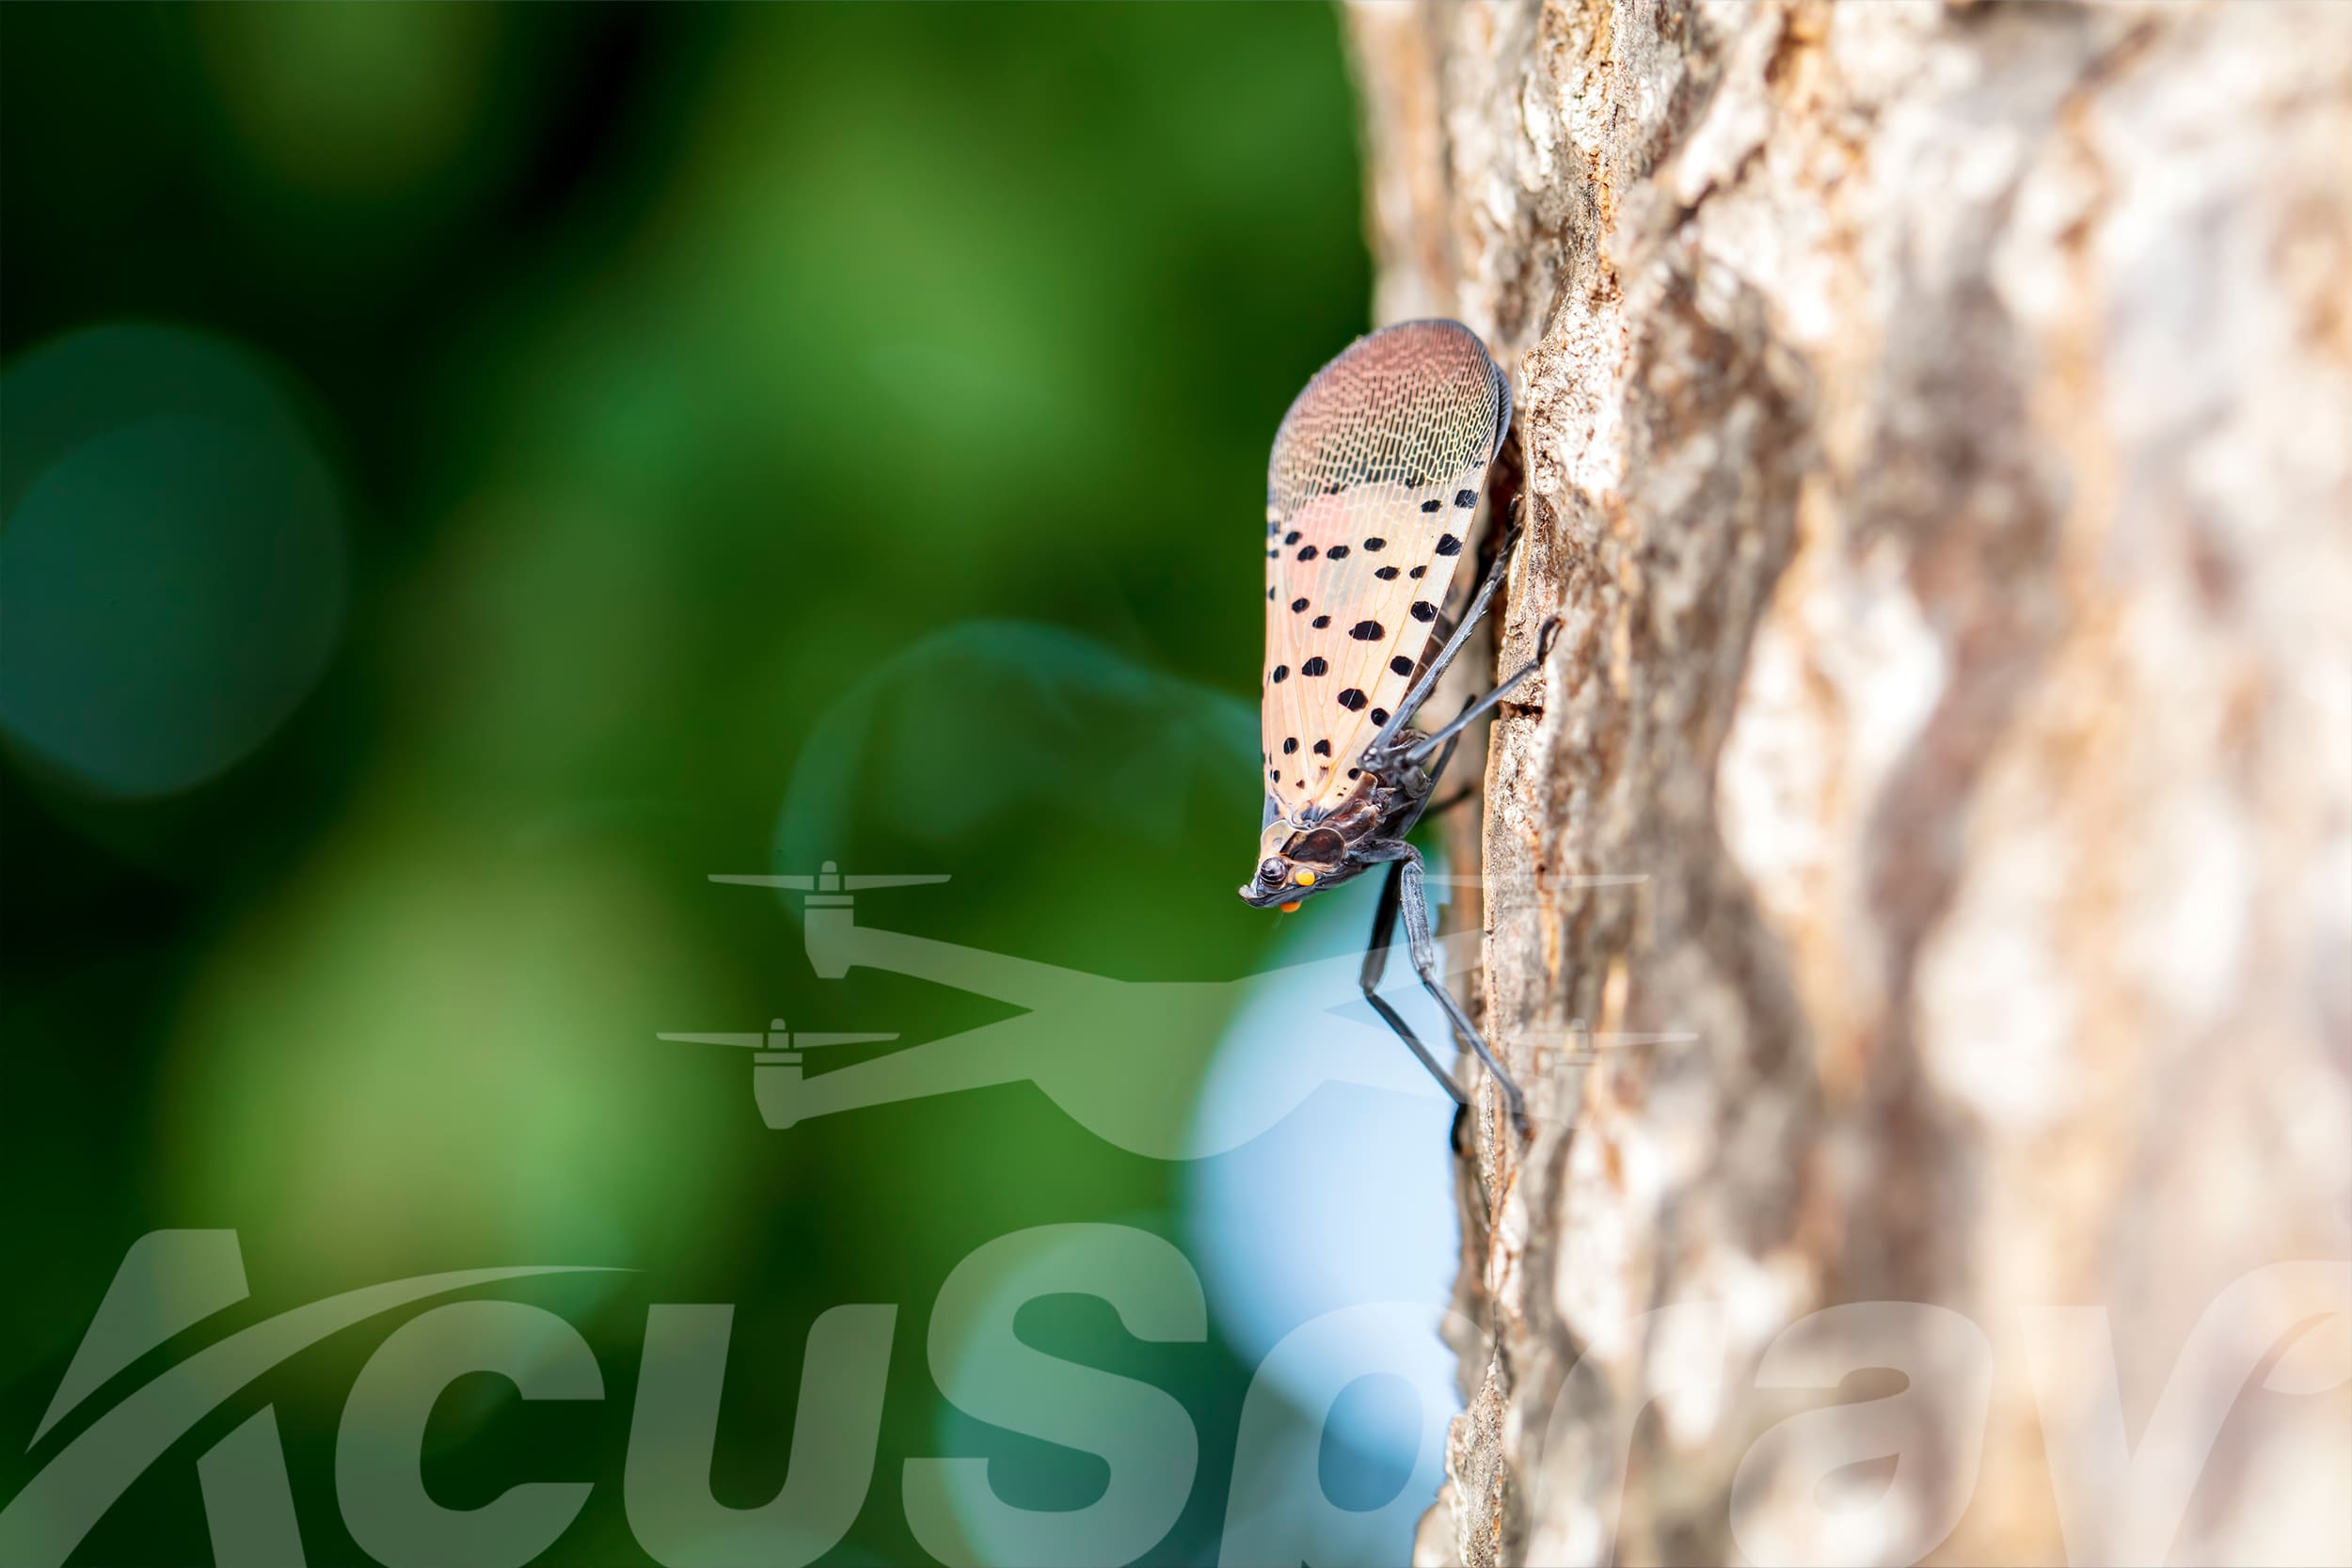 Close-up of a Spotted Lanternfly perched on a tree bark.